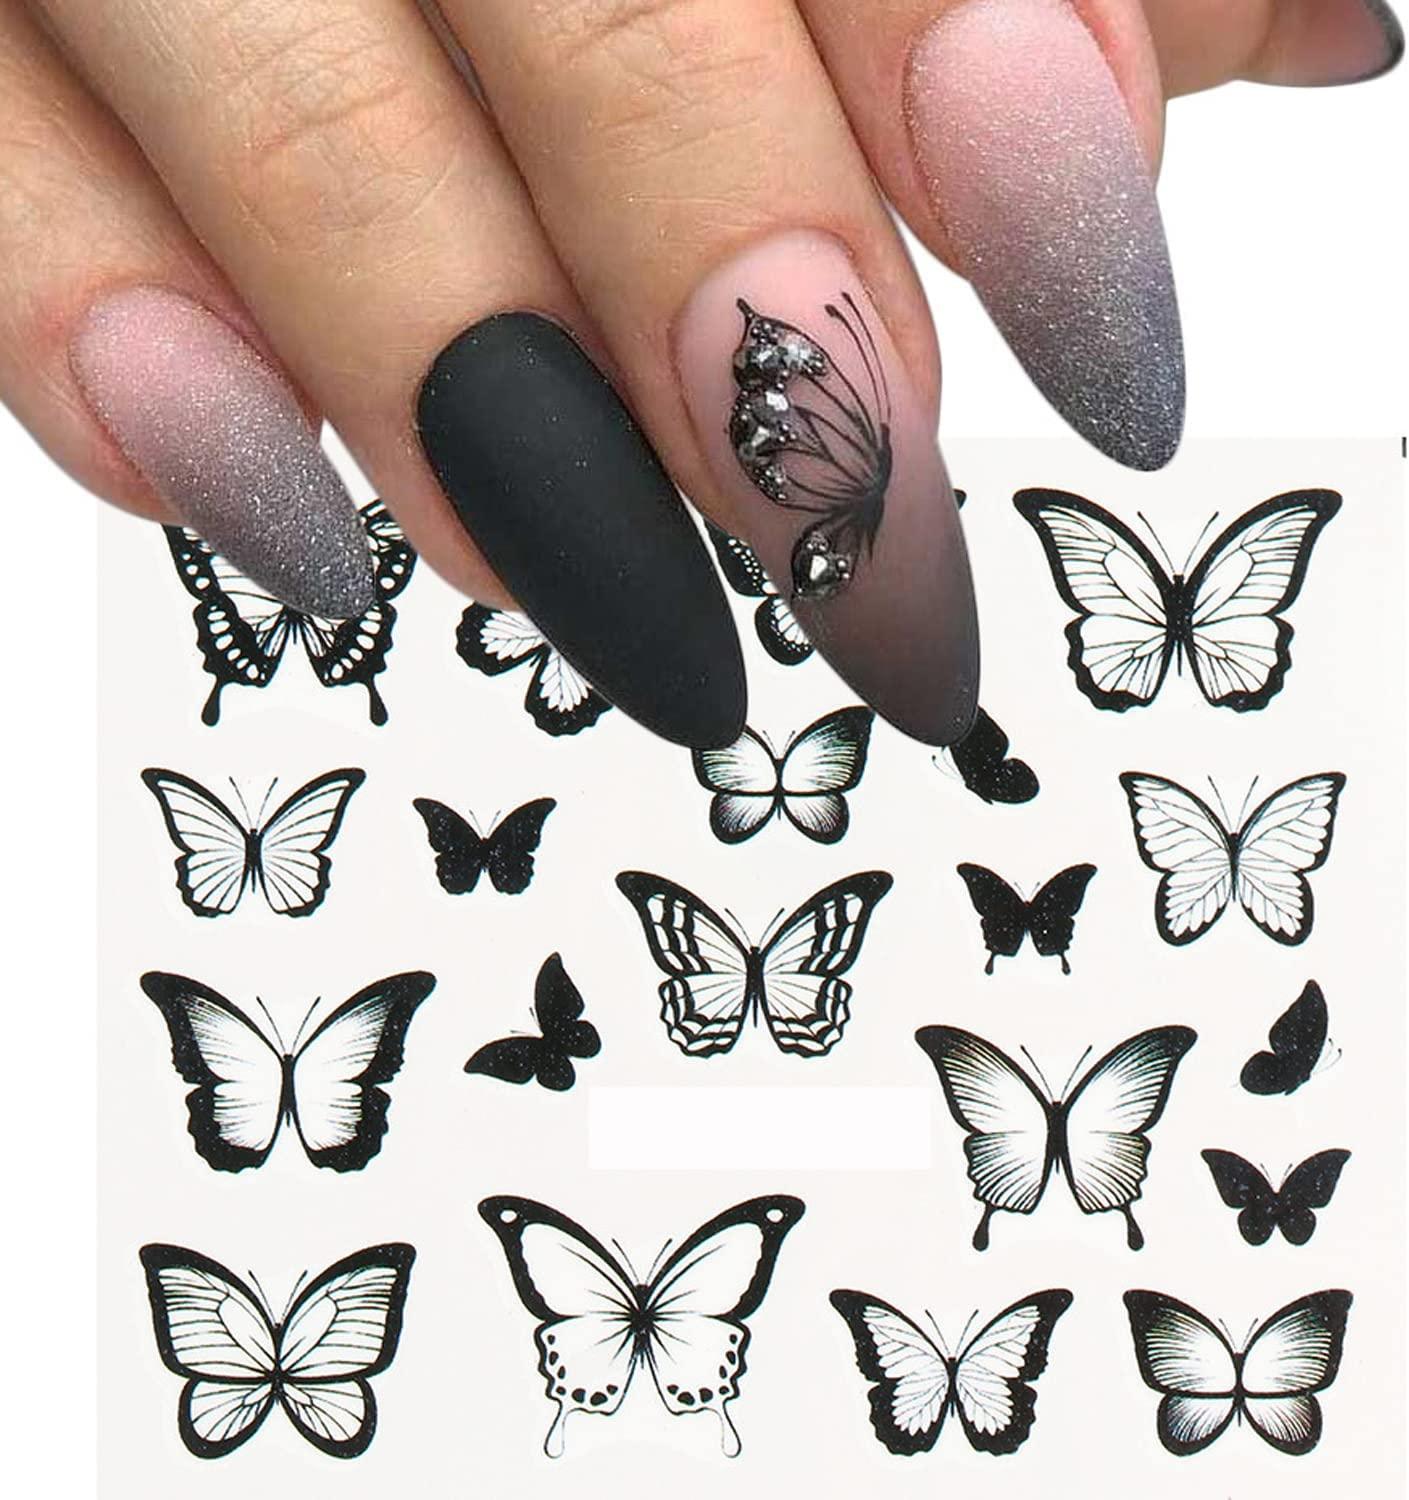 Colorful Butterfly Nail Stickers Butterfly 2020 New Design For Womens  Fashionable Flower Nails Perfect For Manicure From Goddare, $9.55 |  DHgate.Com